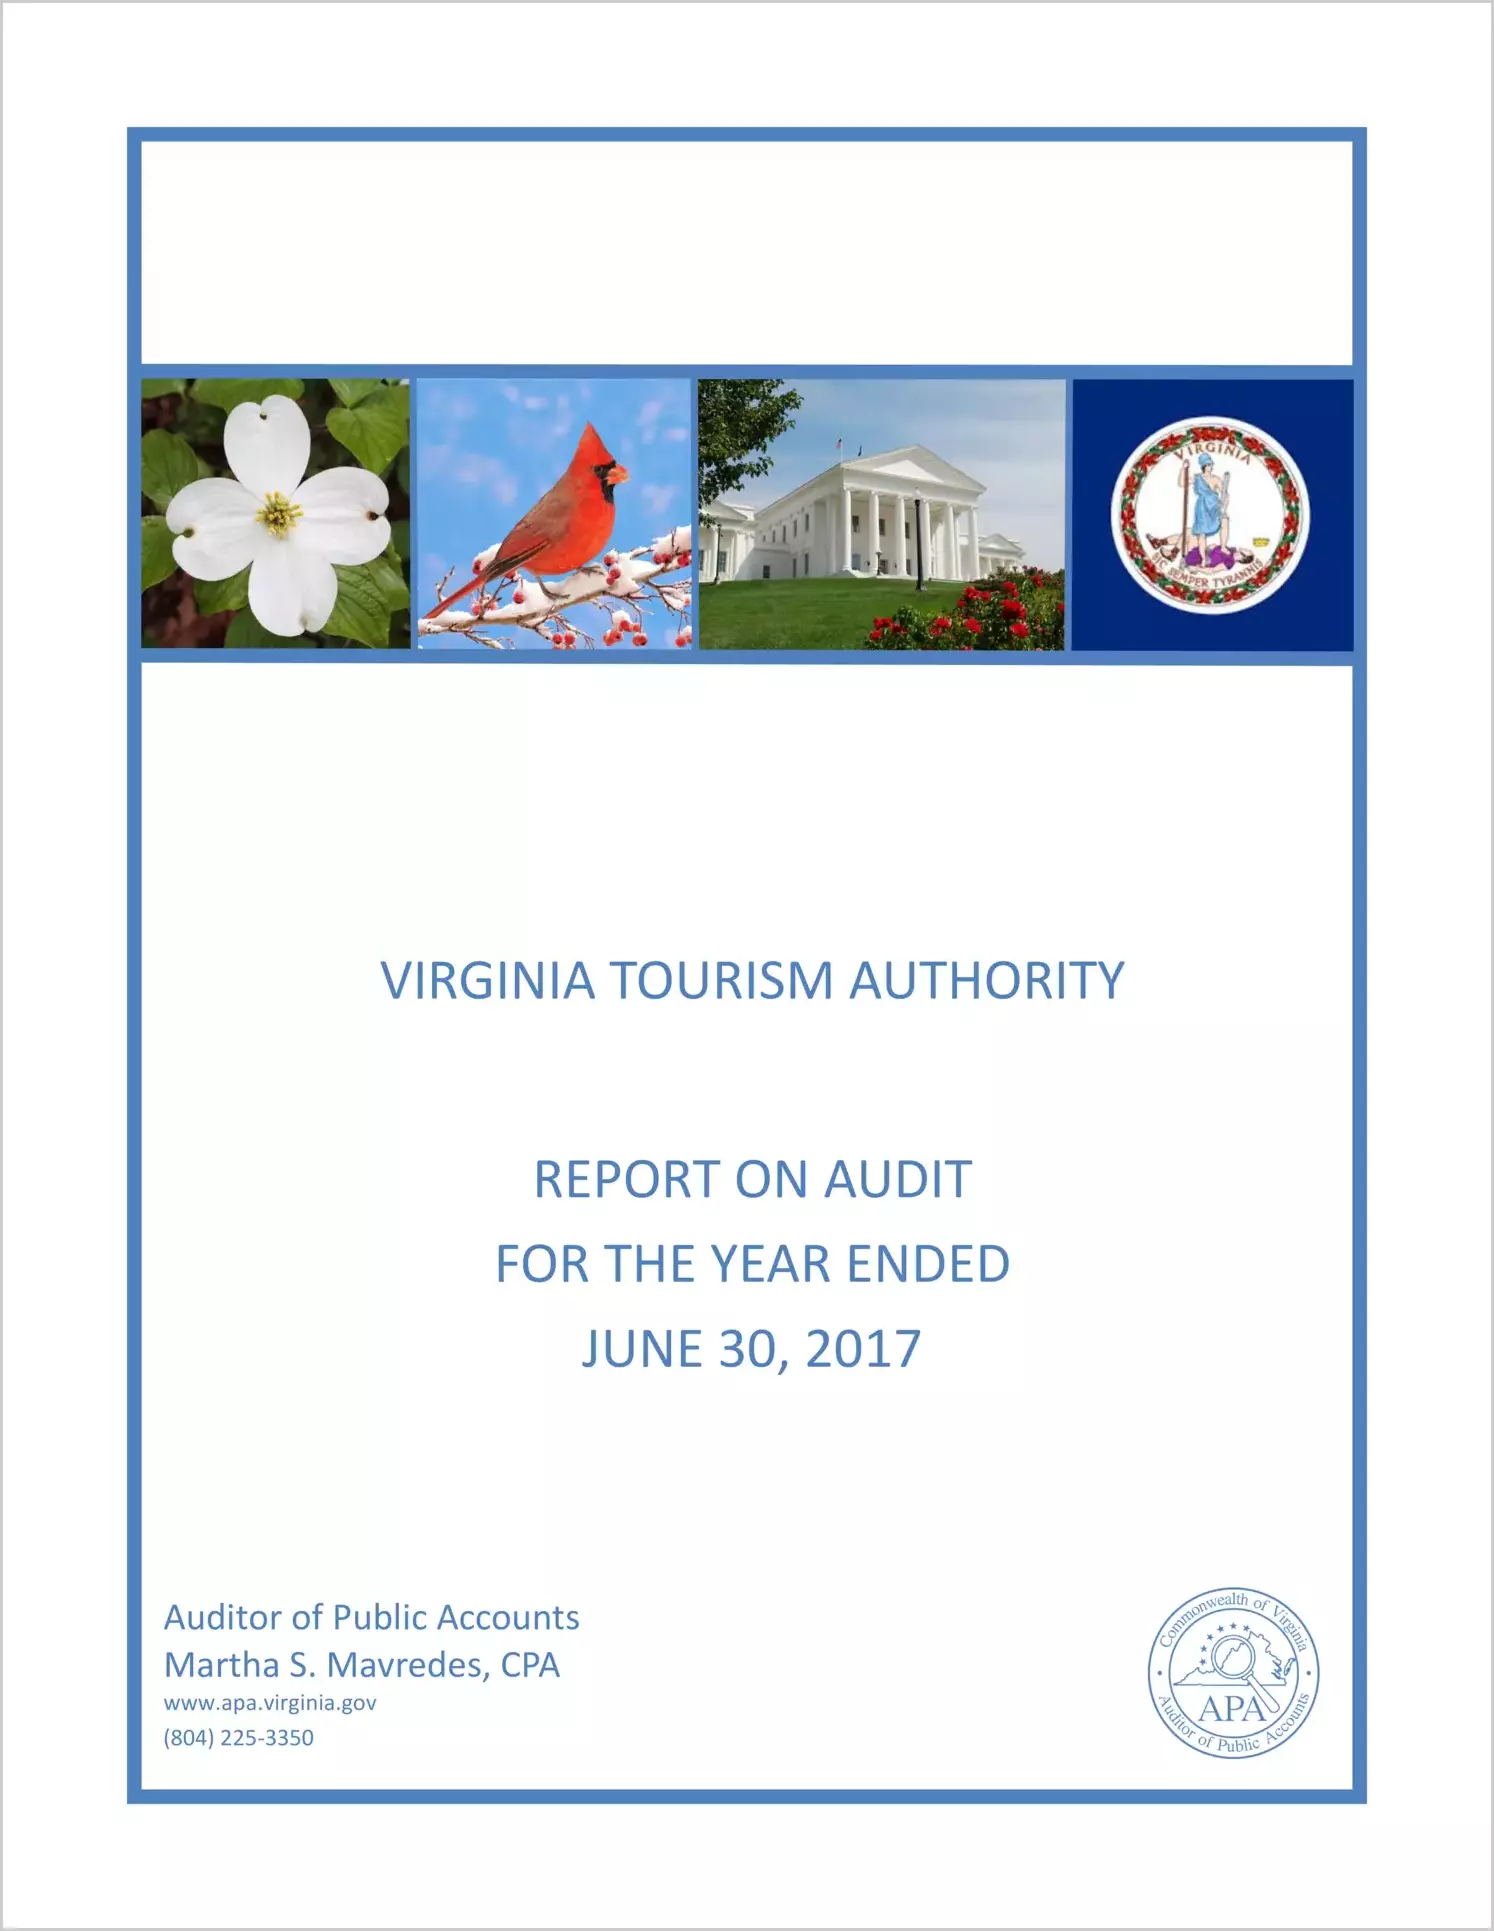 Virginia Tourism Authority for the year ended June 30, 2017